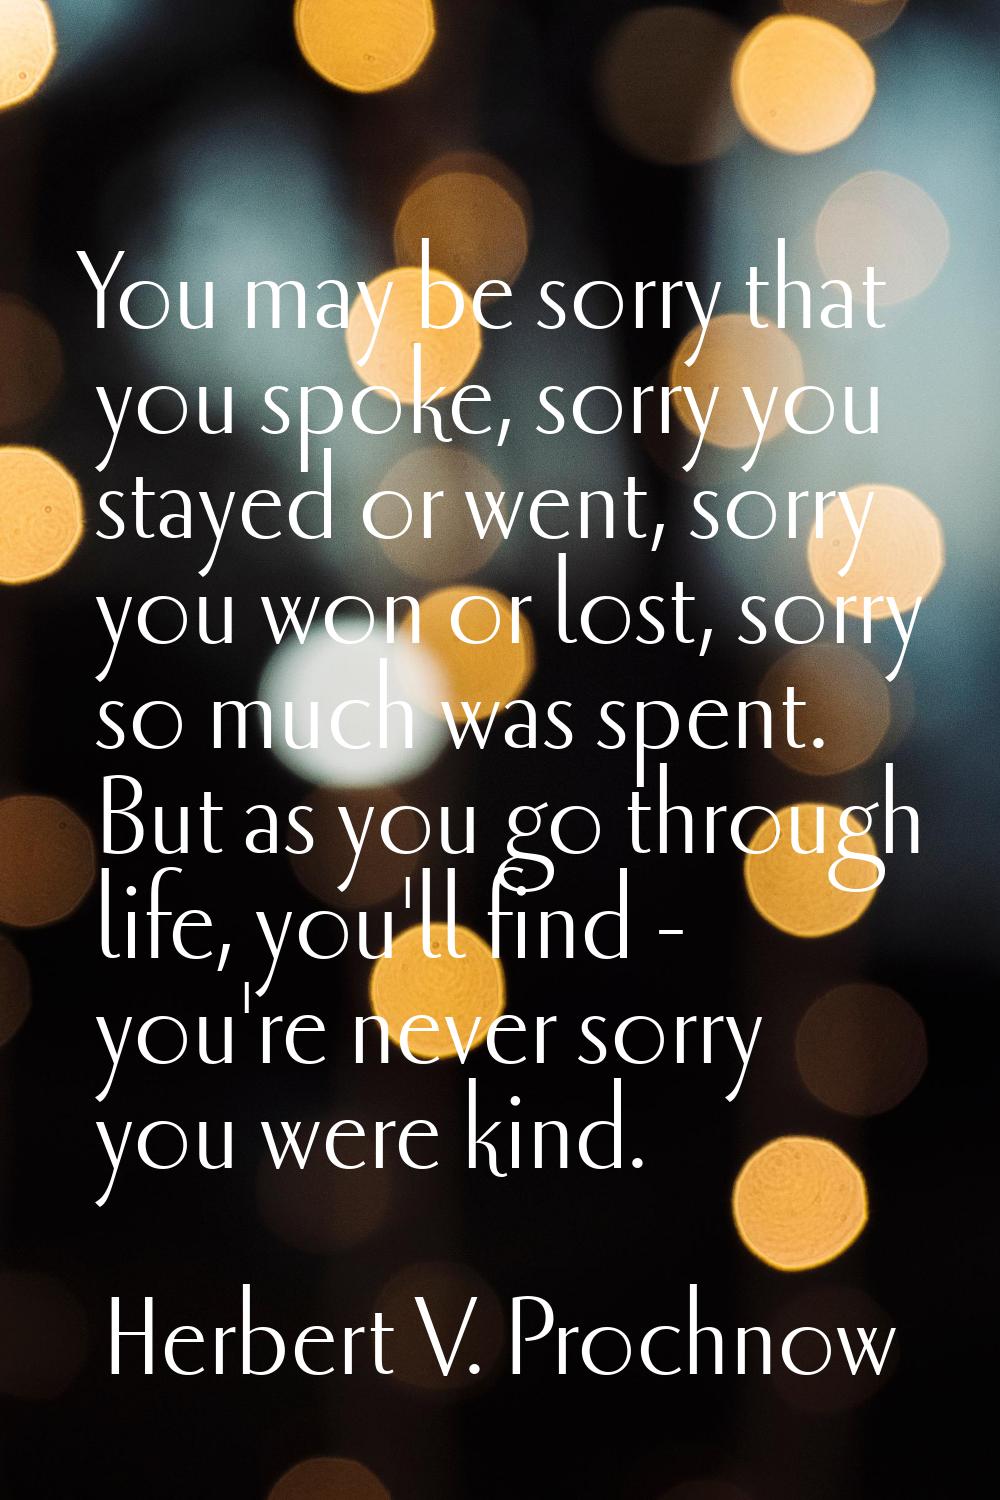 You may be sorry that you spoke, sorry you stayed or went, sorry you won or lost, sorry so much was